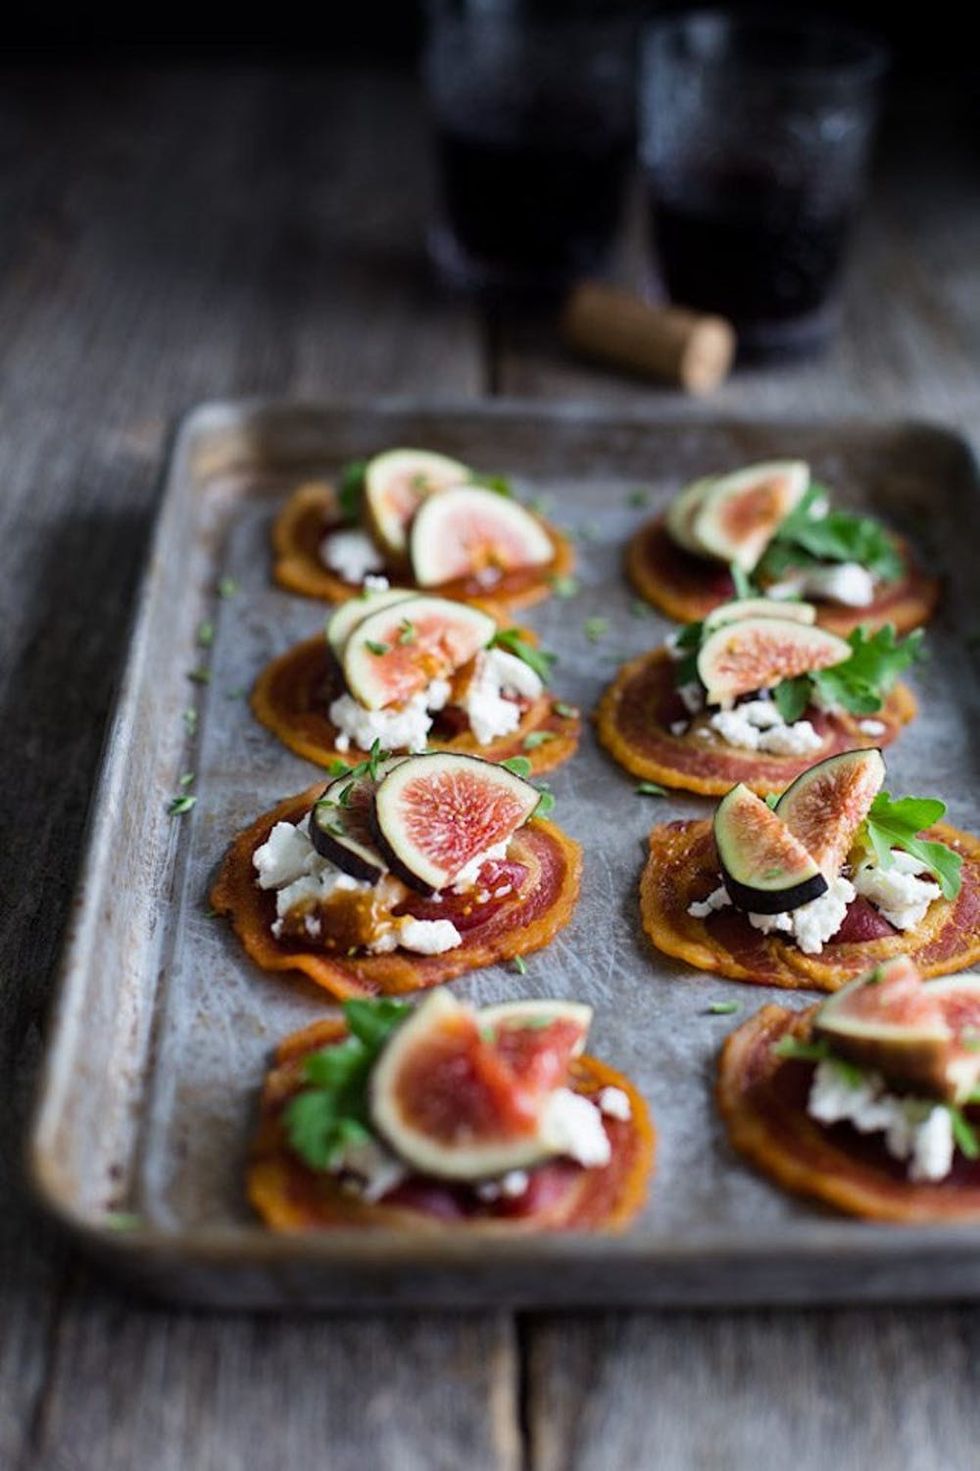 Pancetta Canap\u00e9s with Goat Cheese and Figs